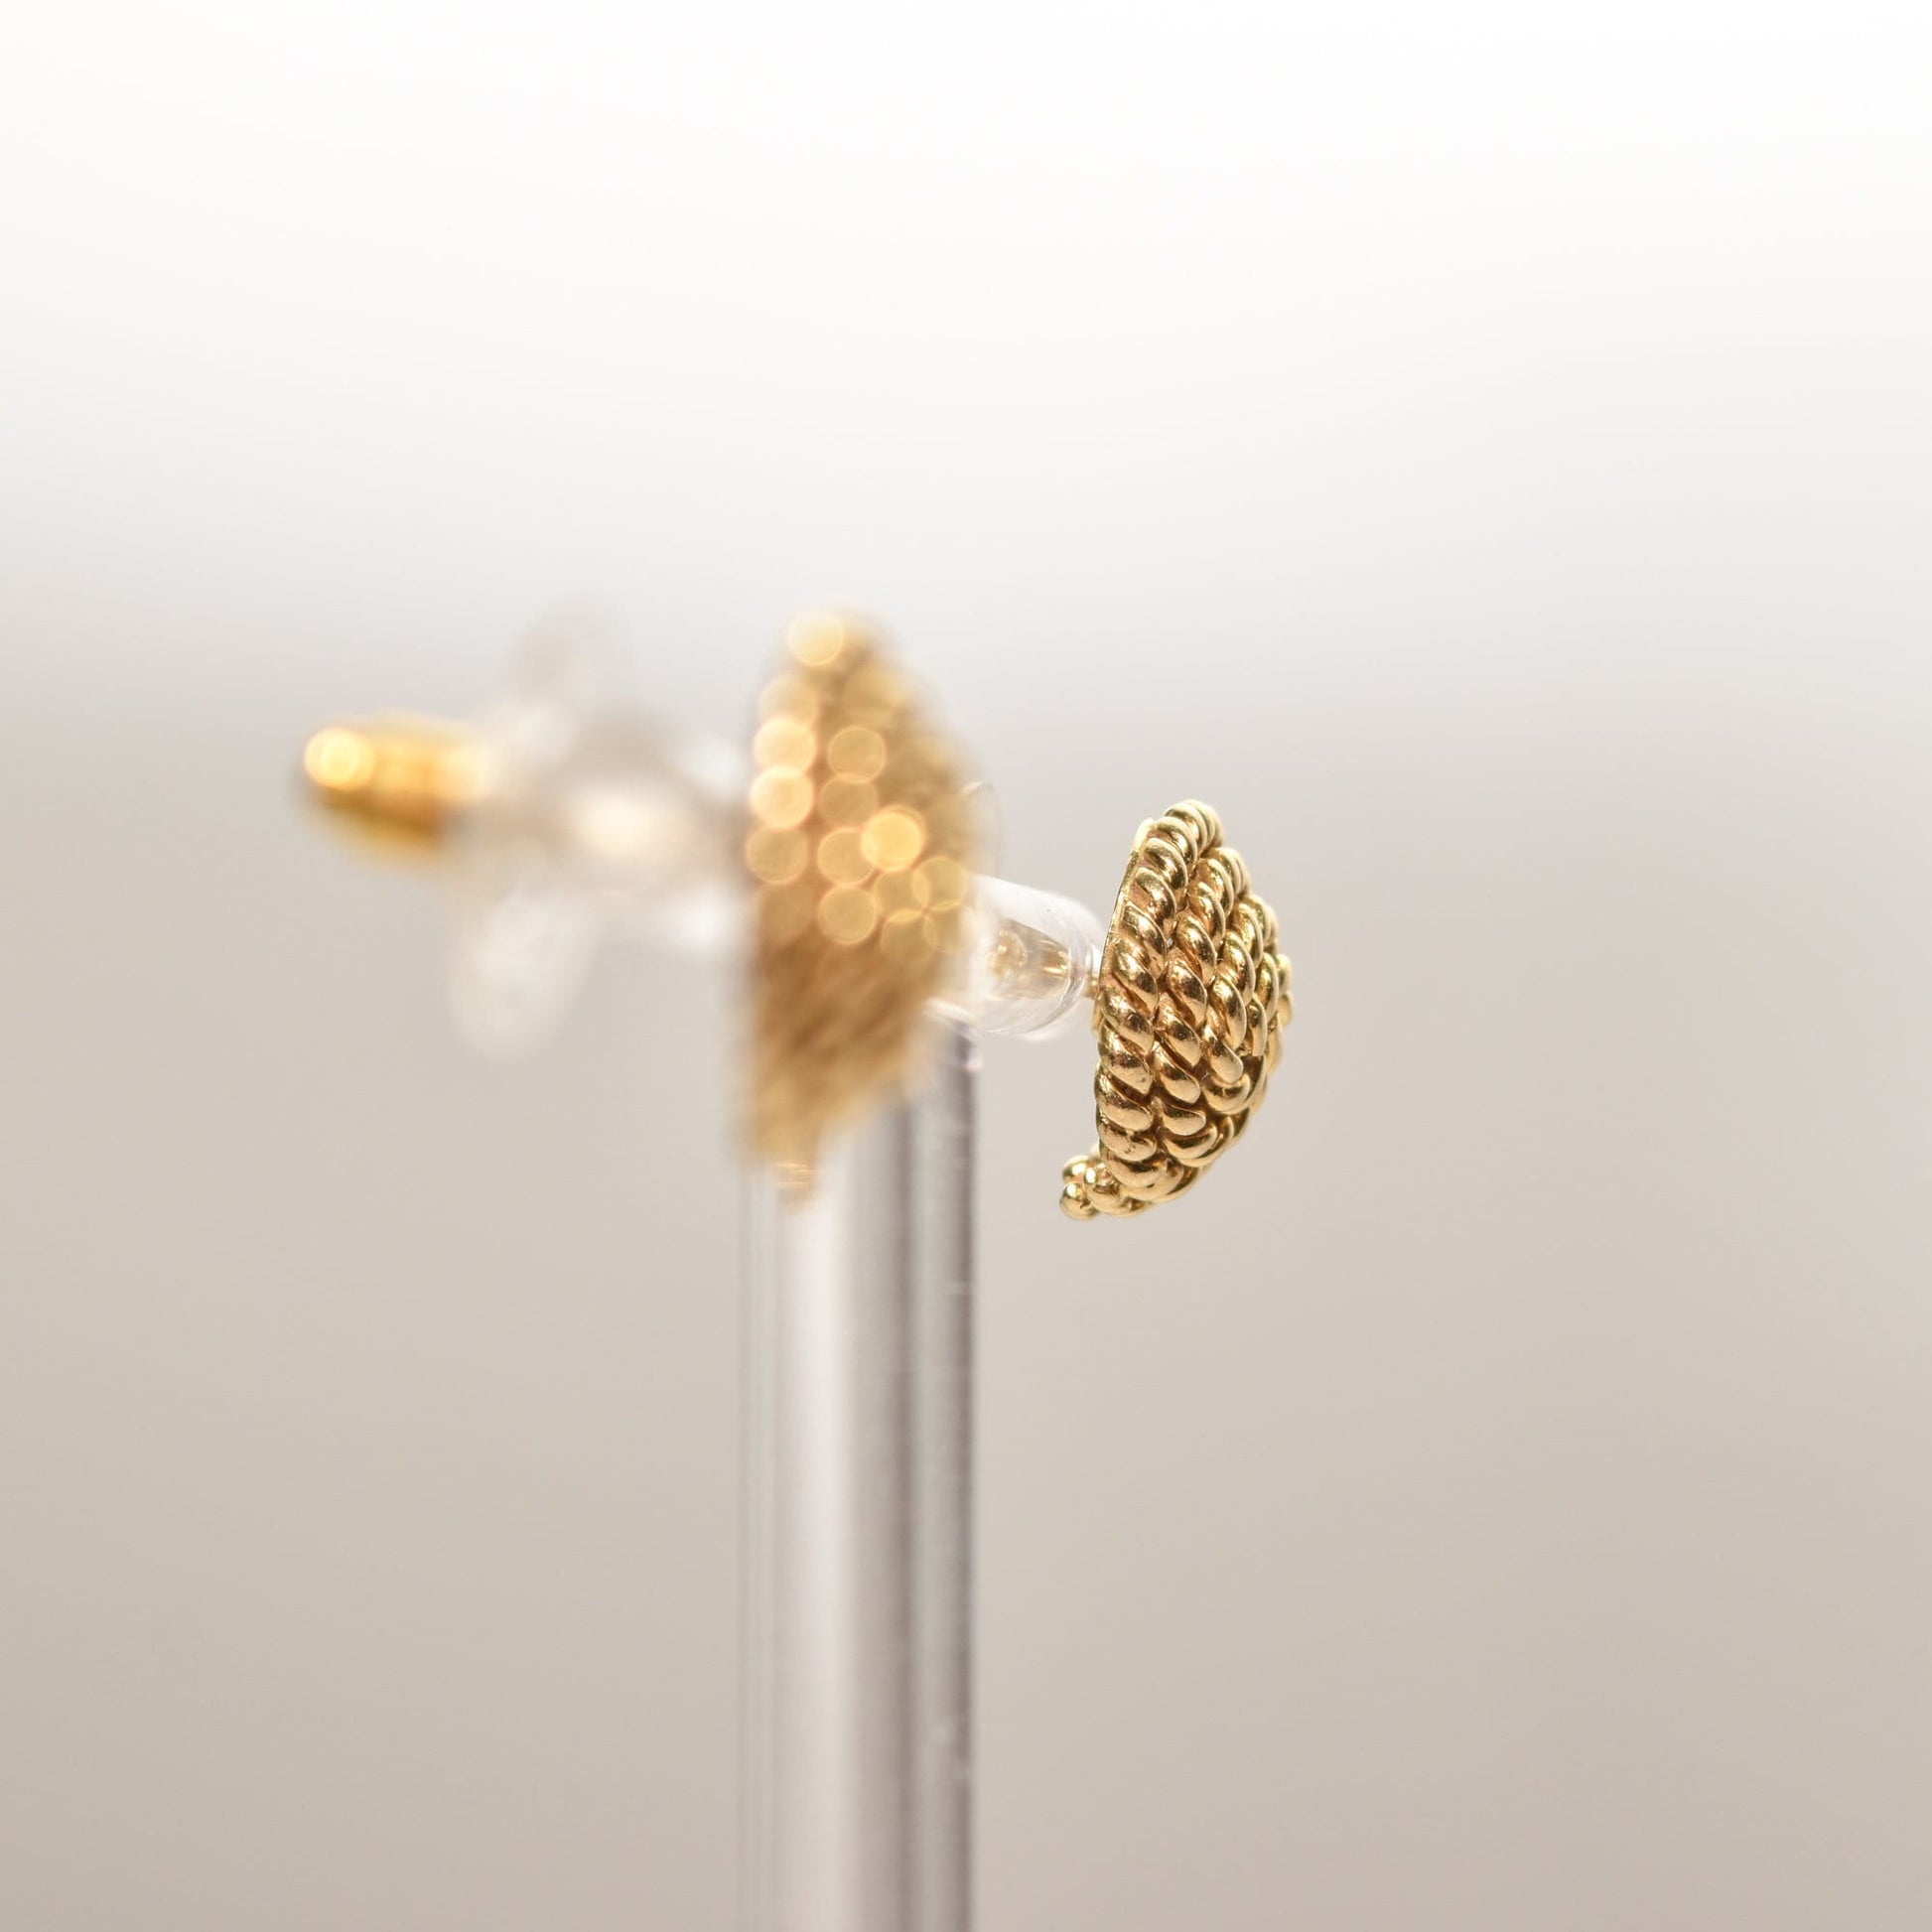 Alt text: Tiffany & Co Schlumberger 18K gold woven button stud earrings with coiled rope design displayed on a clear stand, showcasing estate jewelry measuring 14.5mm in a soft focus background.